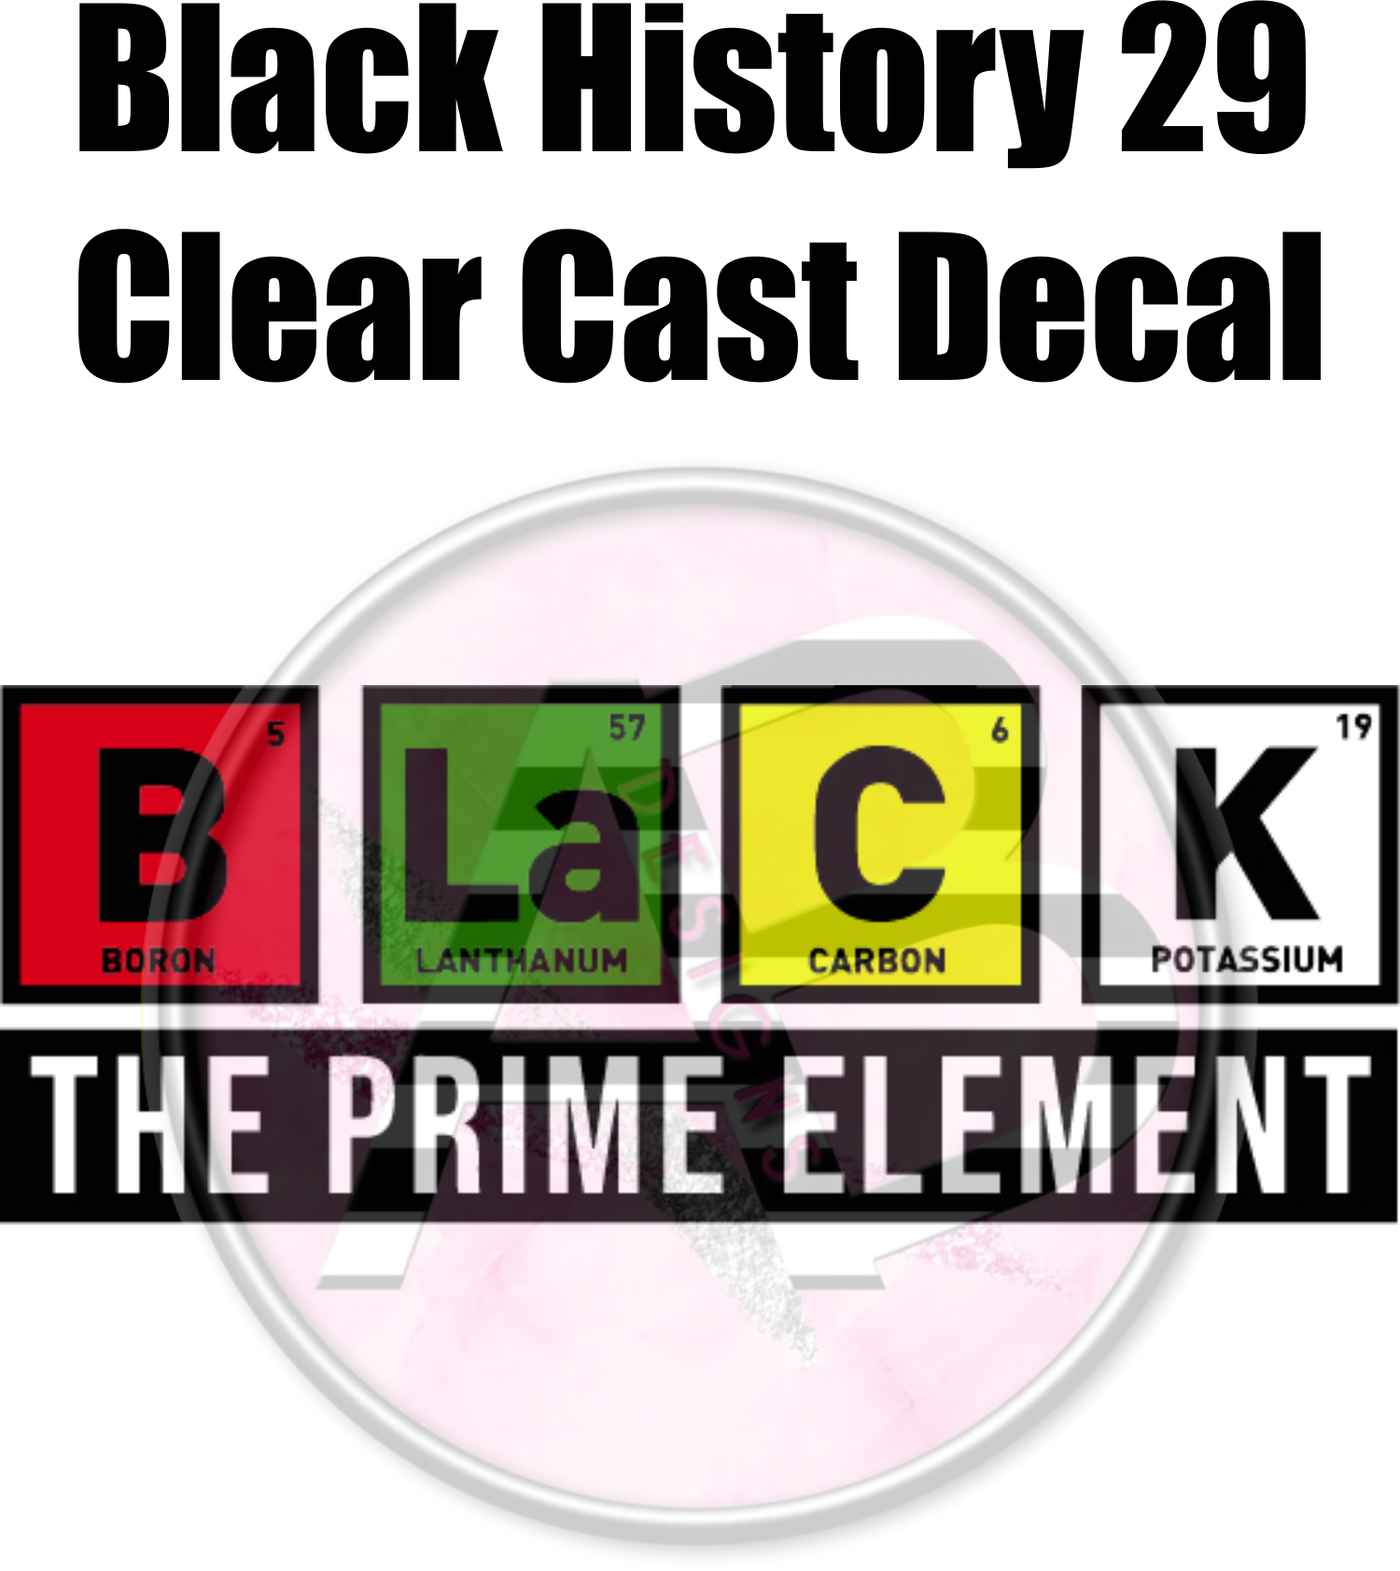 Black History 29 - Clear Cast Decal